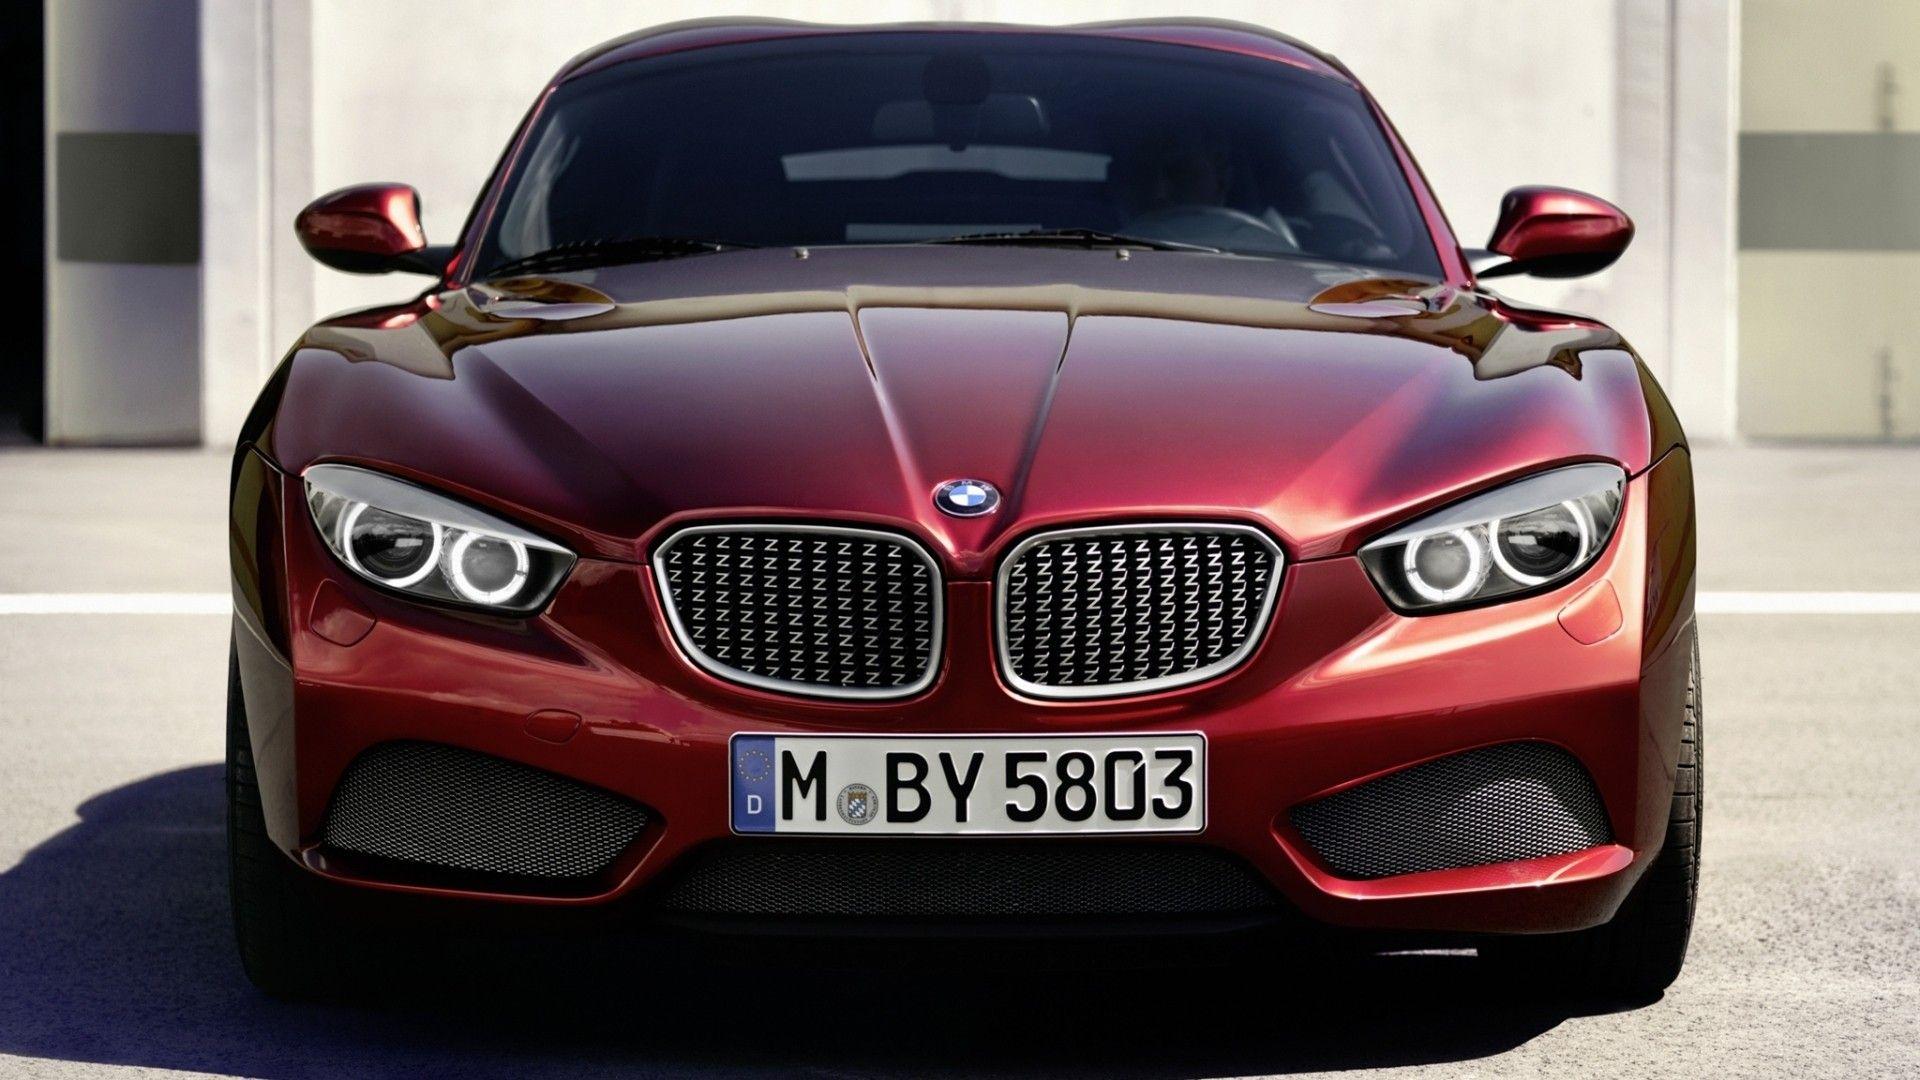 Wallpaper New Bmw Car HD Photo Reviews With Pics Of Image